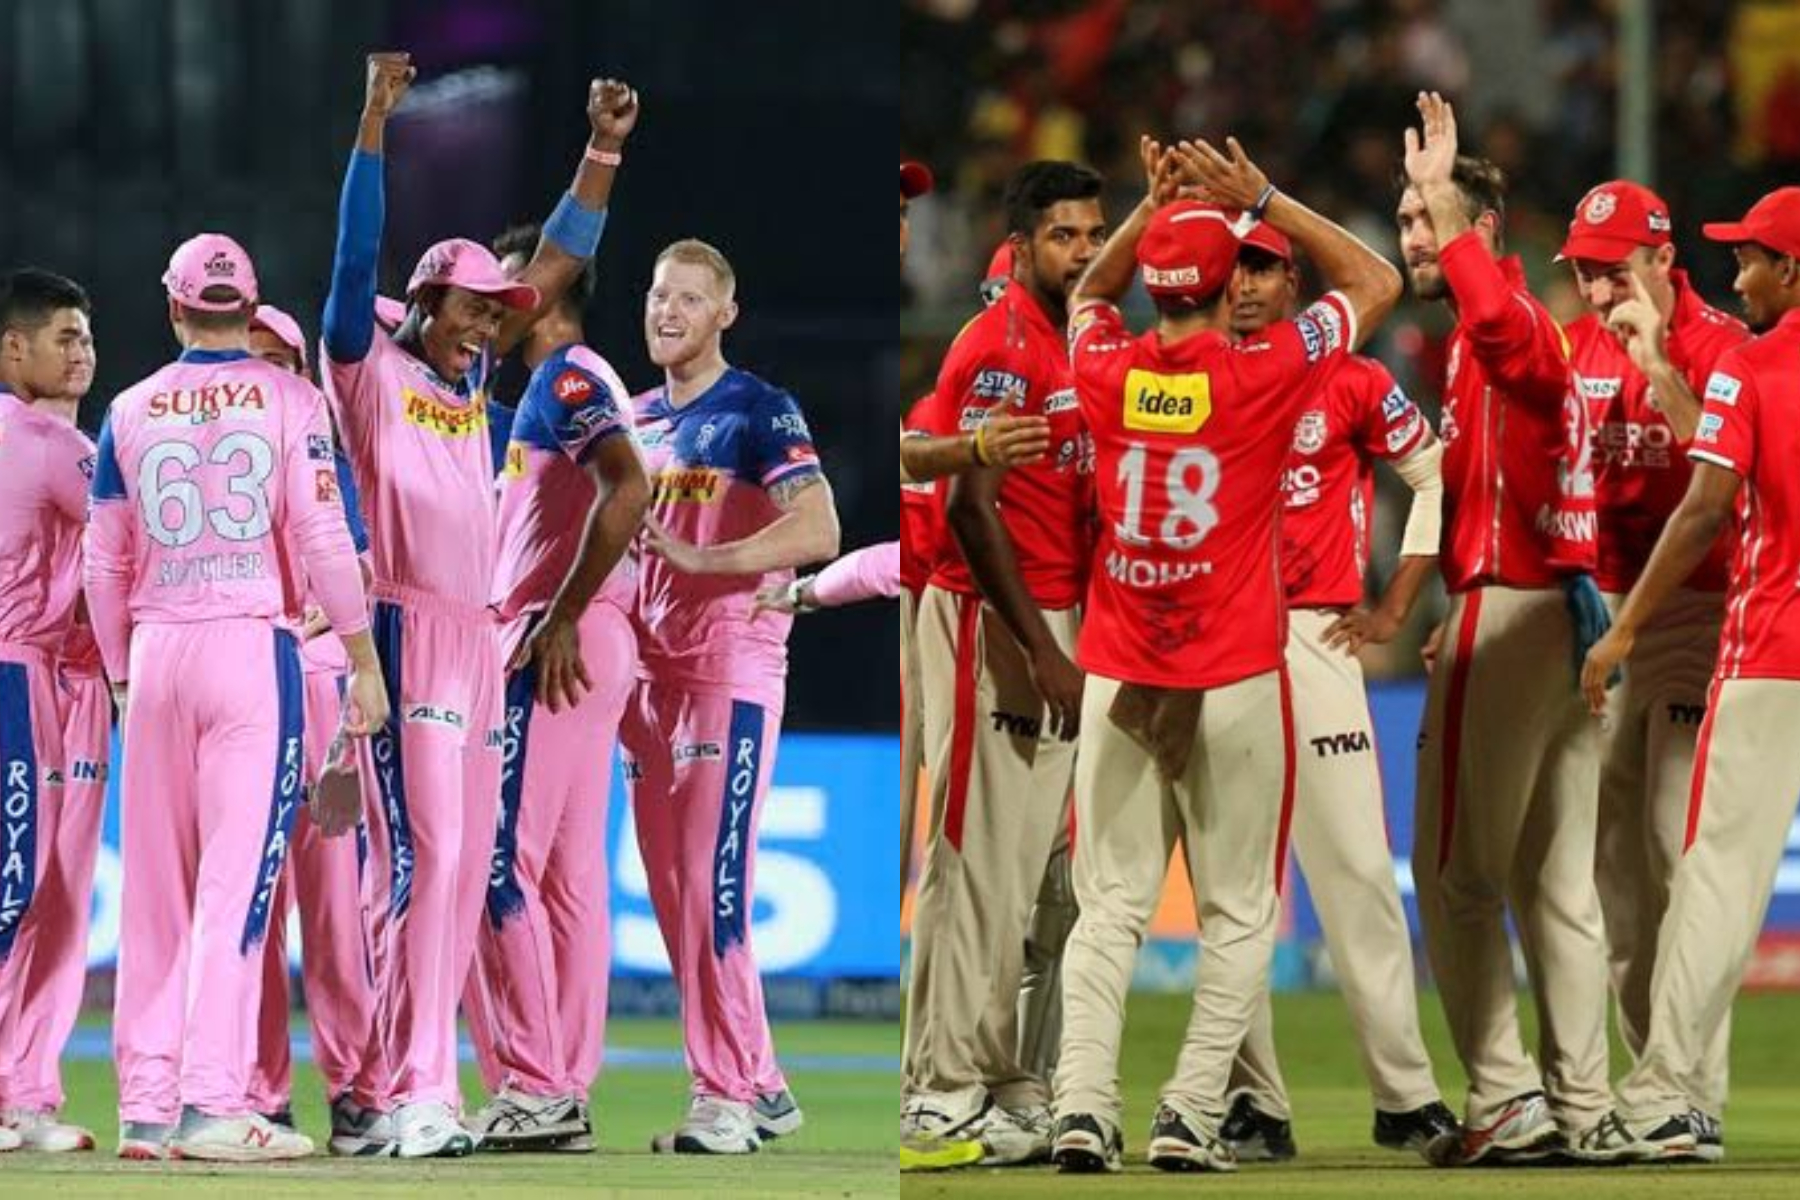 RR and KXIP will begin training from Wednesday onwards